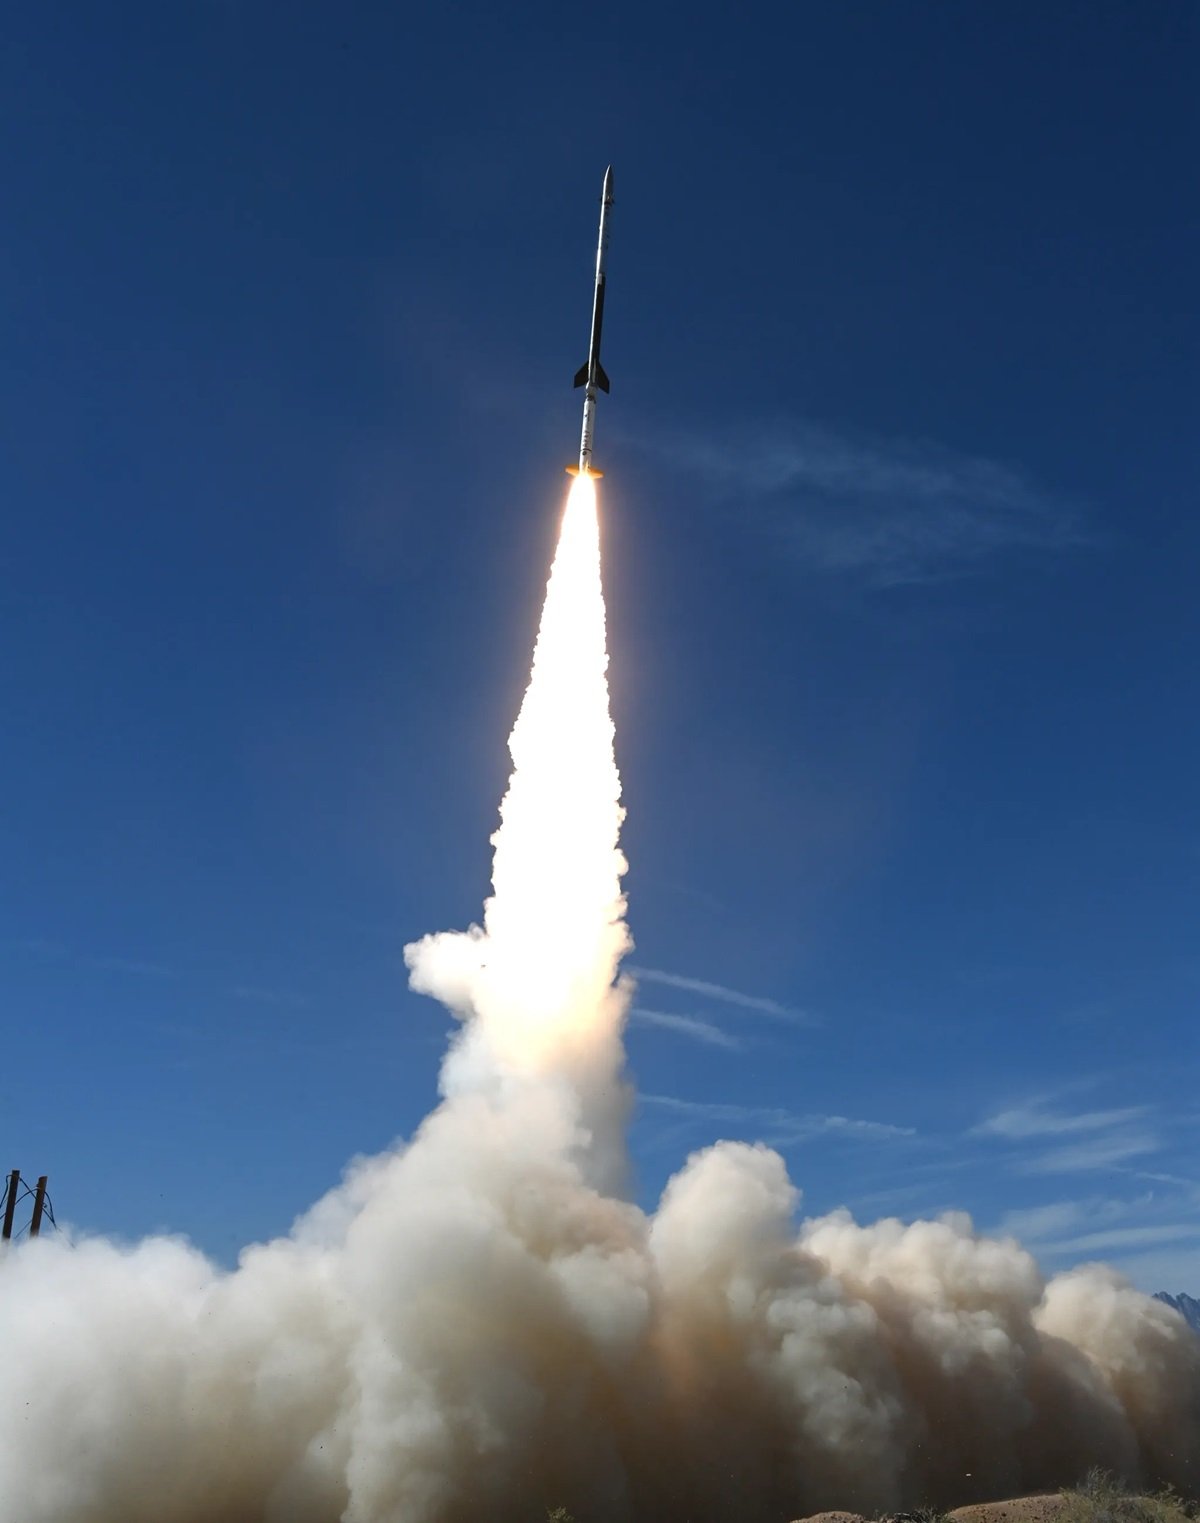 An APEP rocket being launched